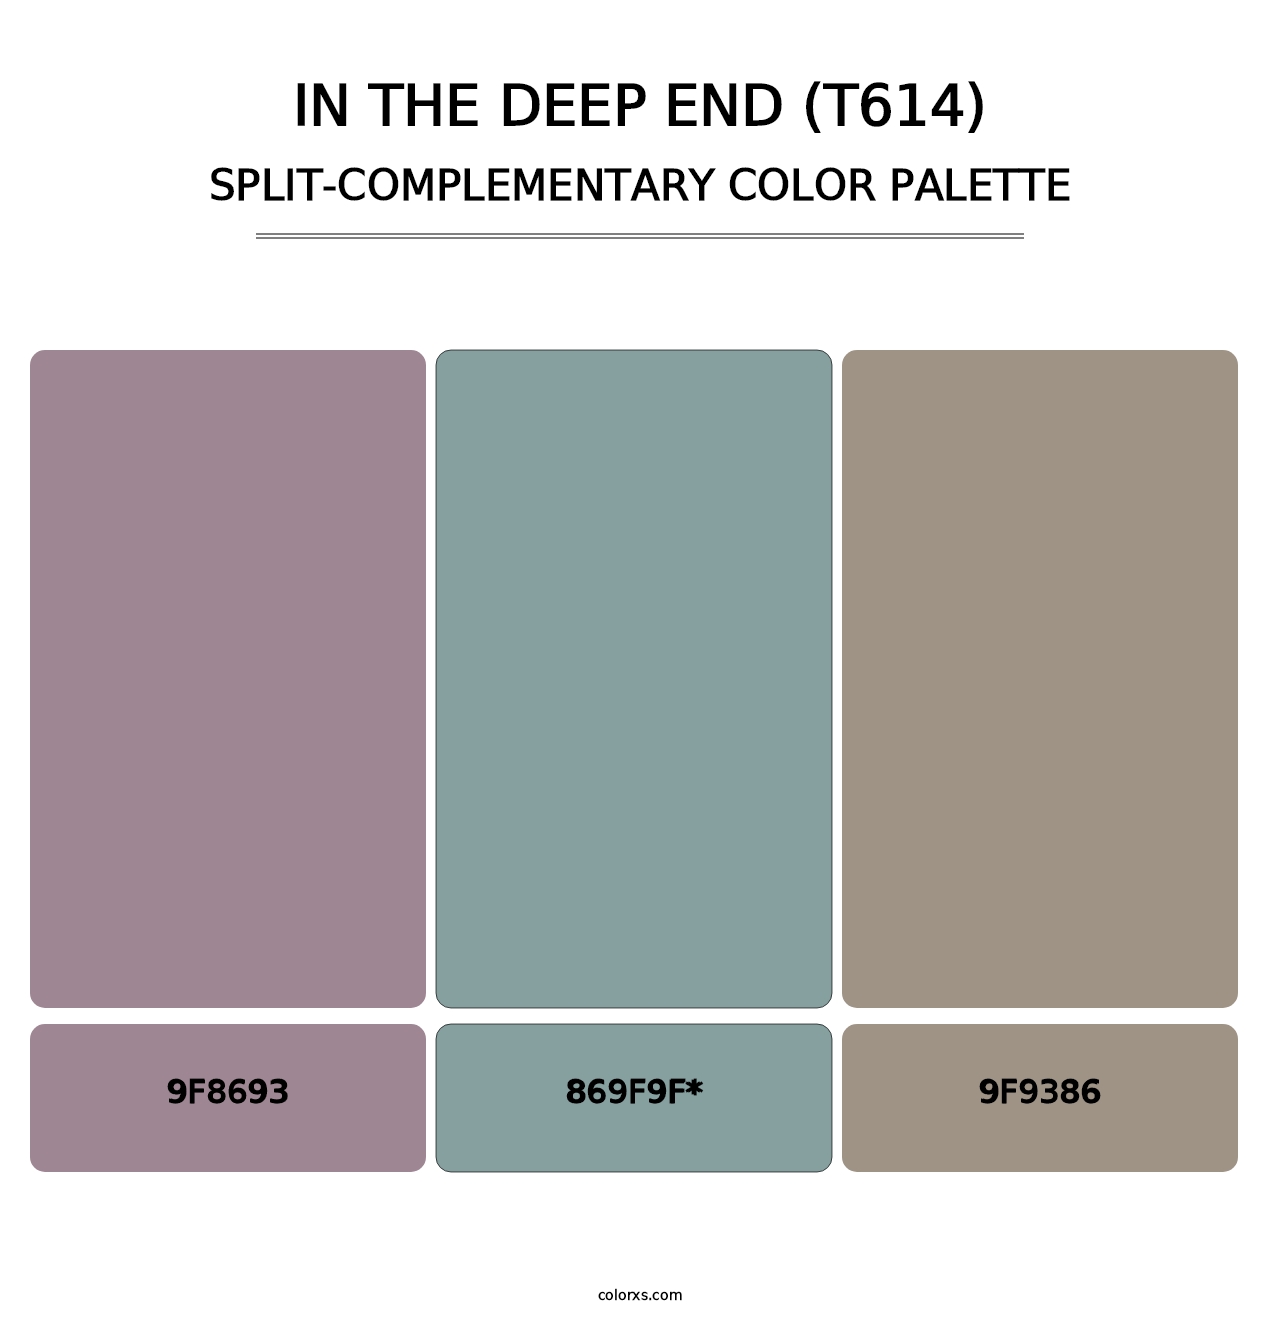 In the Deep End (T614) - Split-Complementary Color Palette